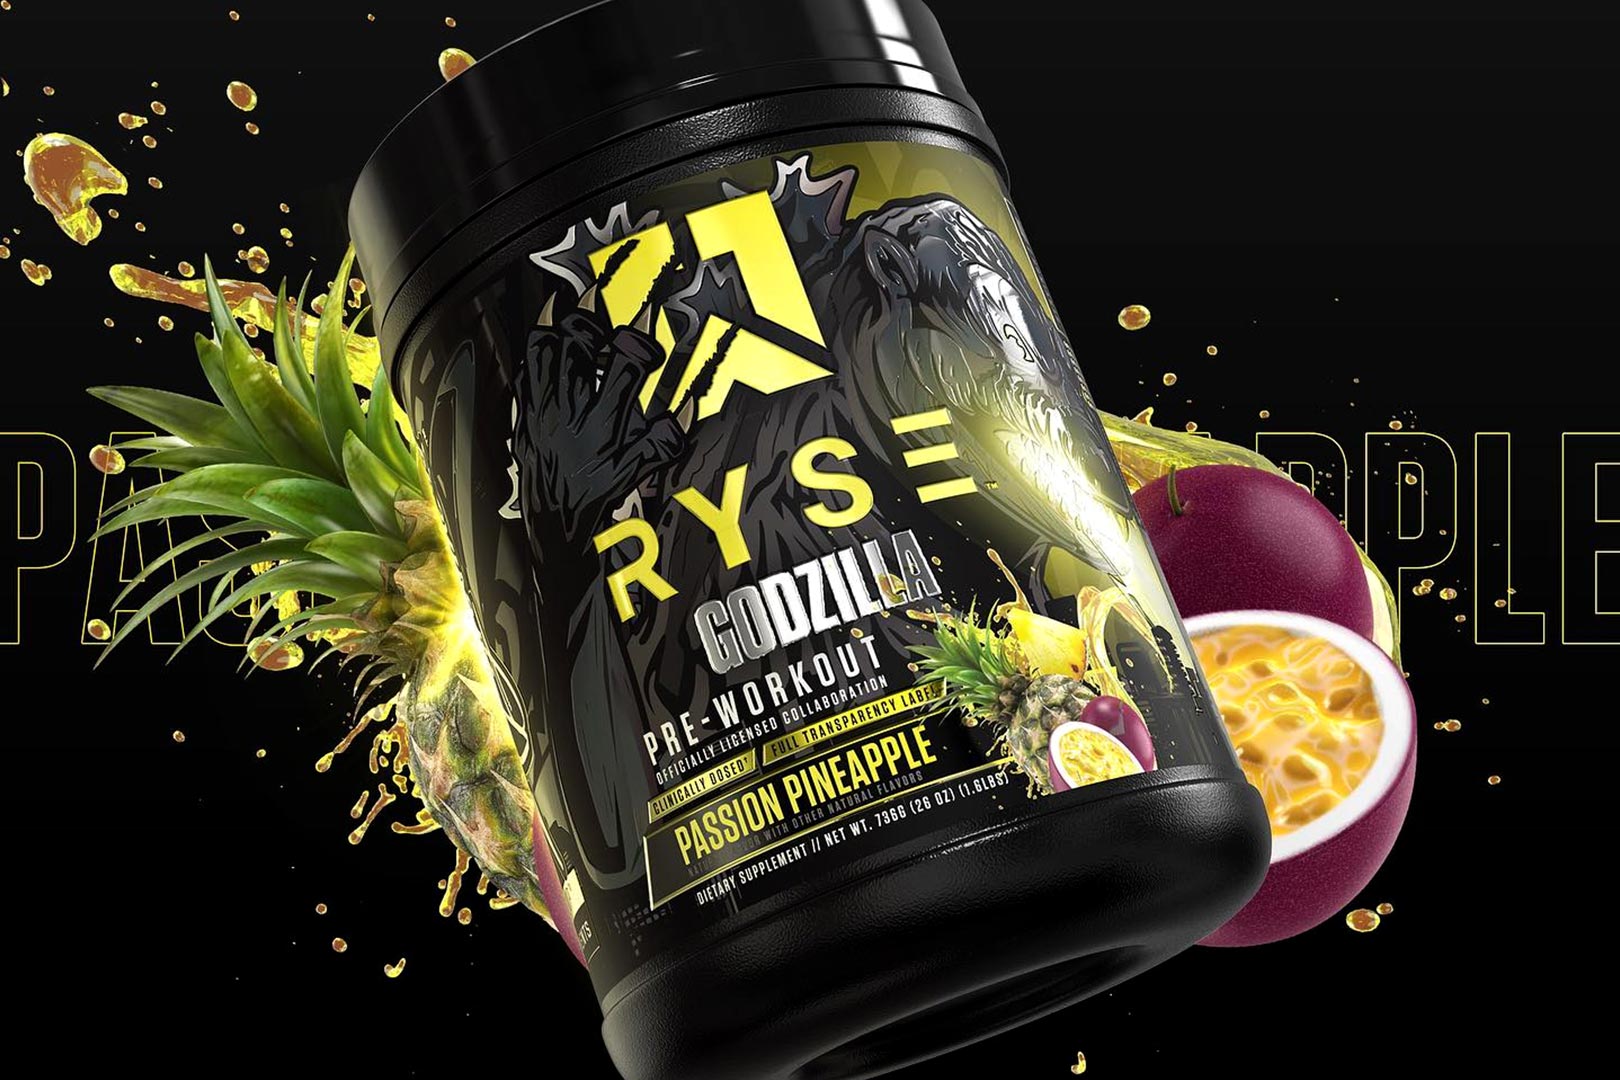 Complete Reveal Of Passion Pineapple Godzilla Pre Workout